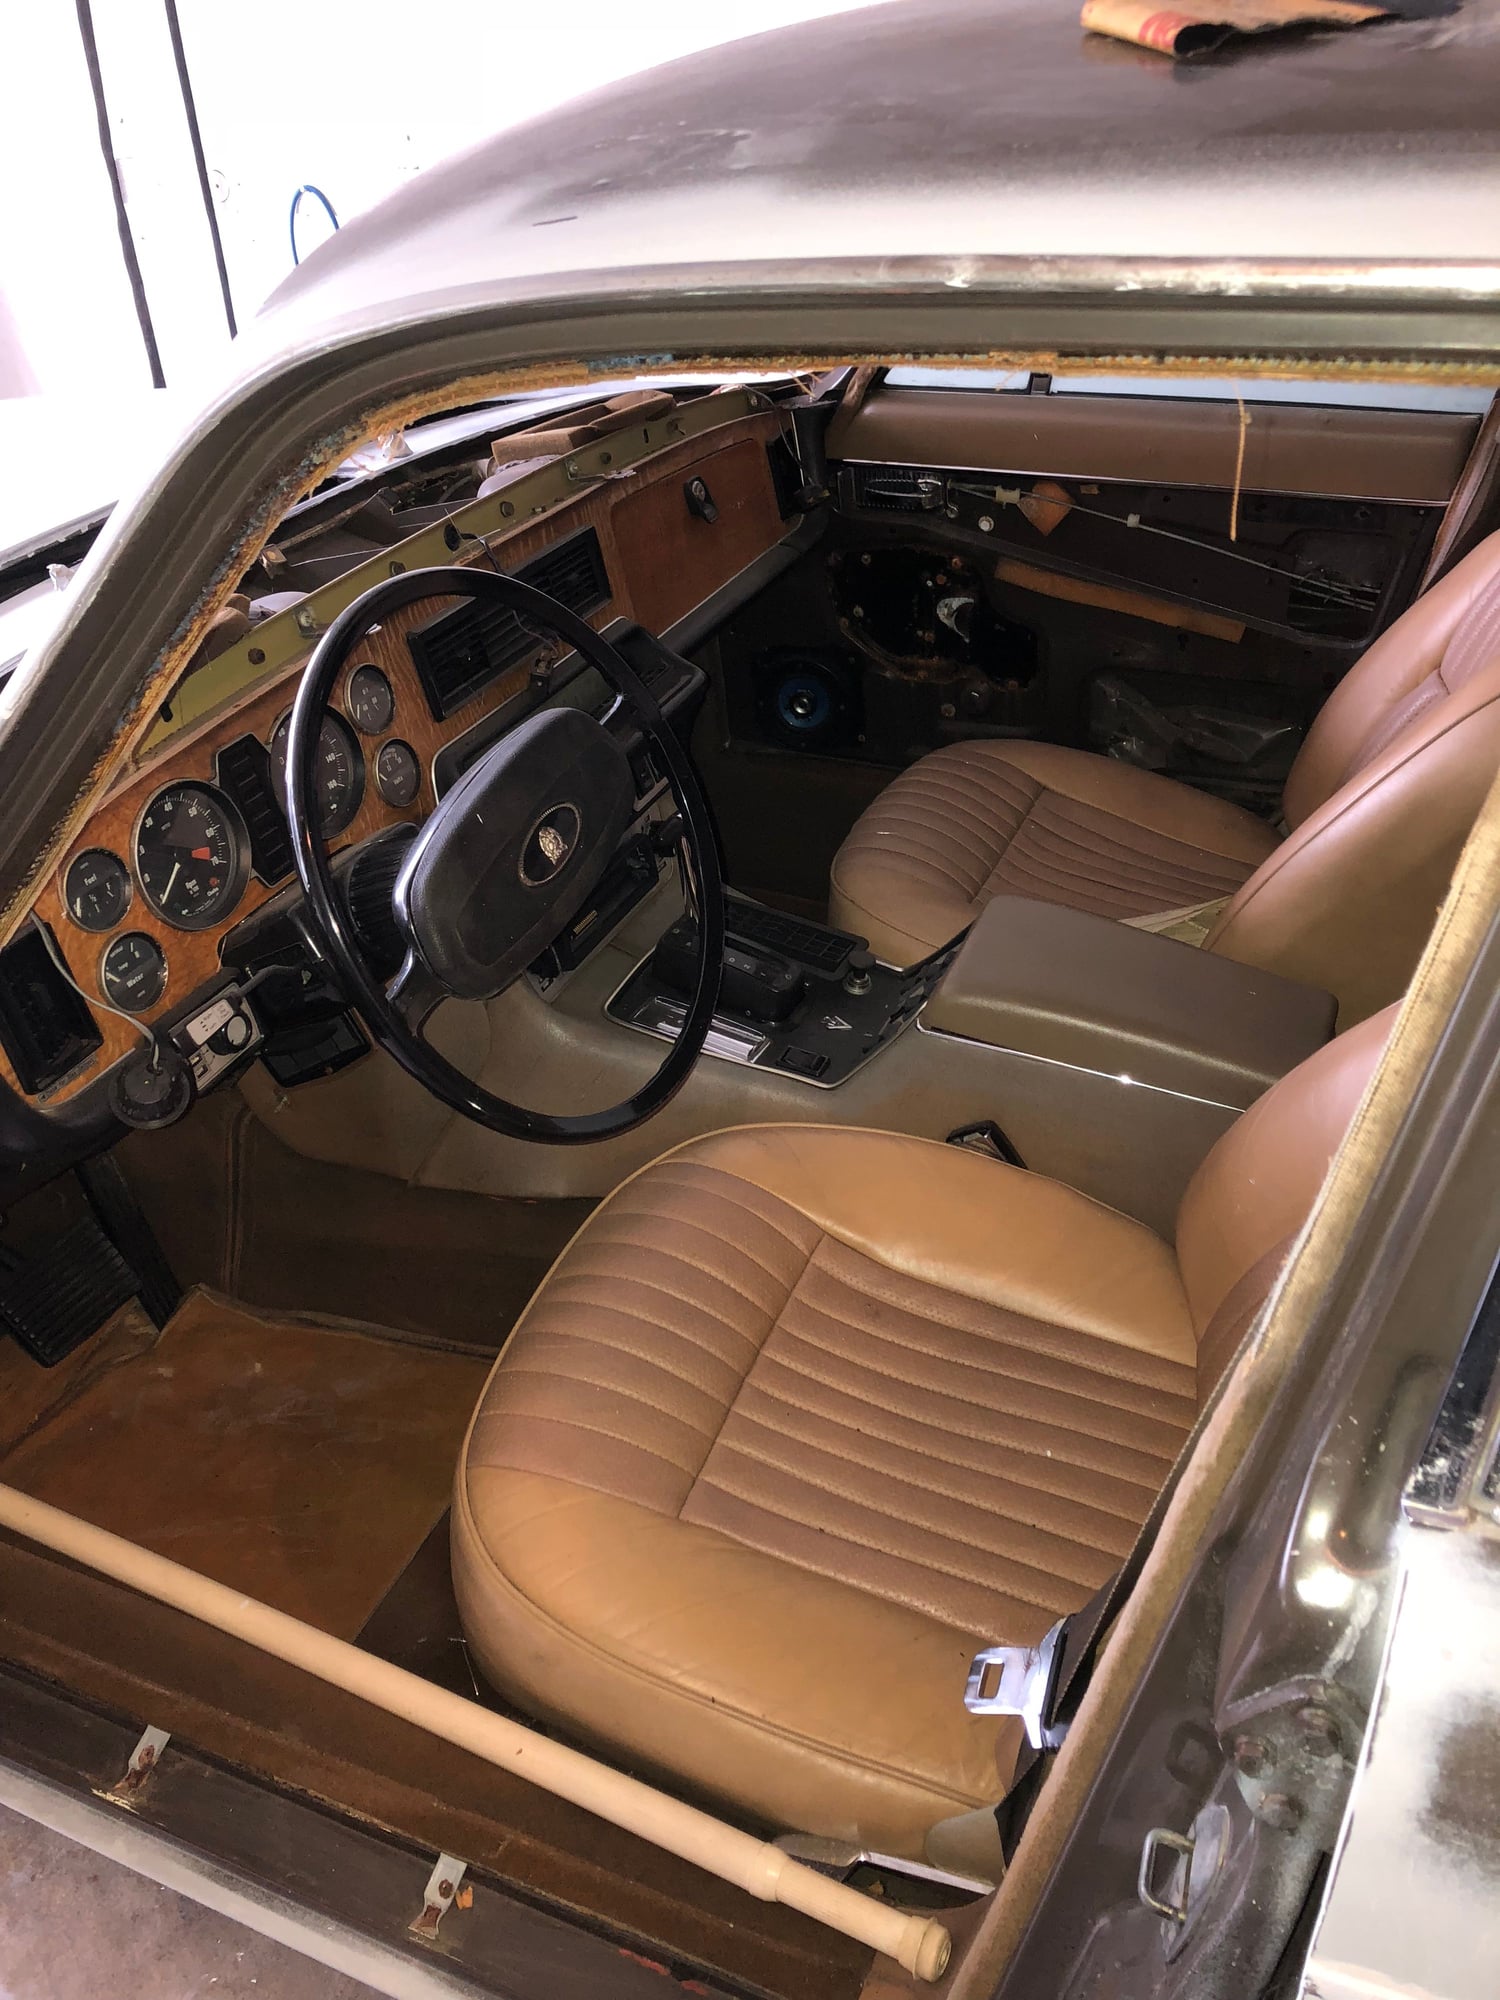 1974 Jaguar XJ12 - 1974 XJ12L Unfinished Running Project - Used - VIN UE2R5068400000000 - 77,800 Miles - 12 cyl - 2WD - Automatic - Sedan - Brown - Euless, TX 76040, United States